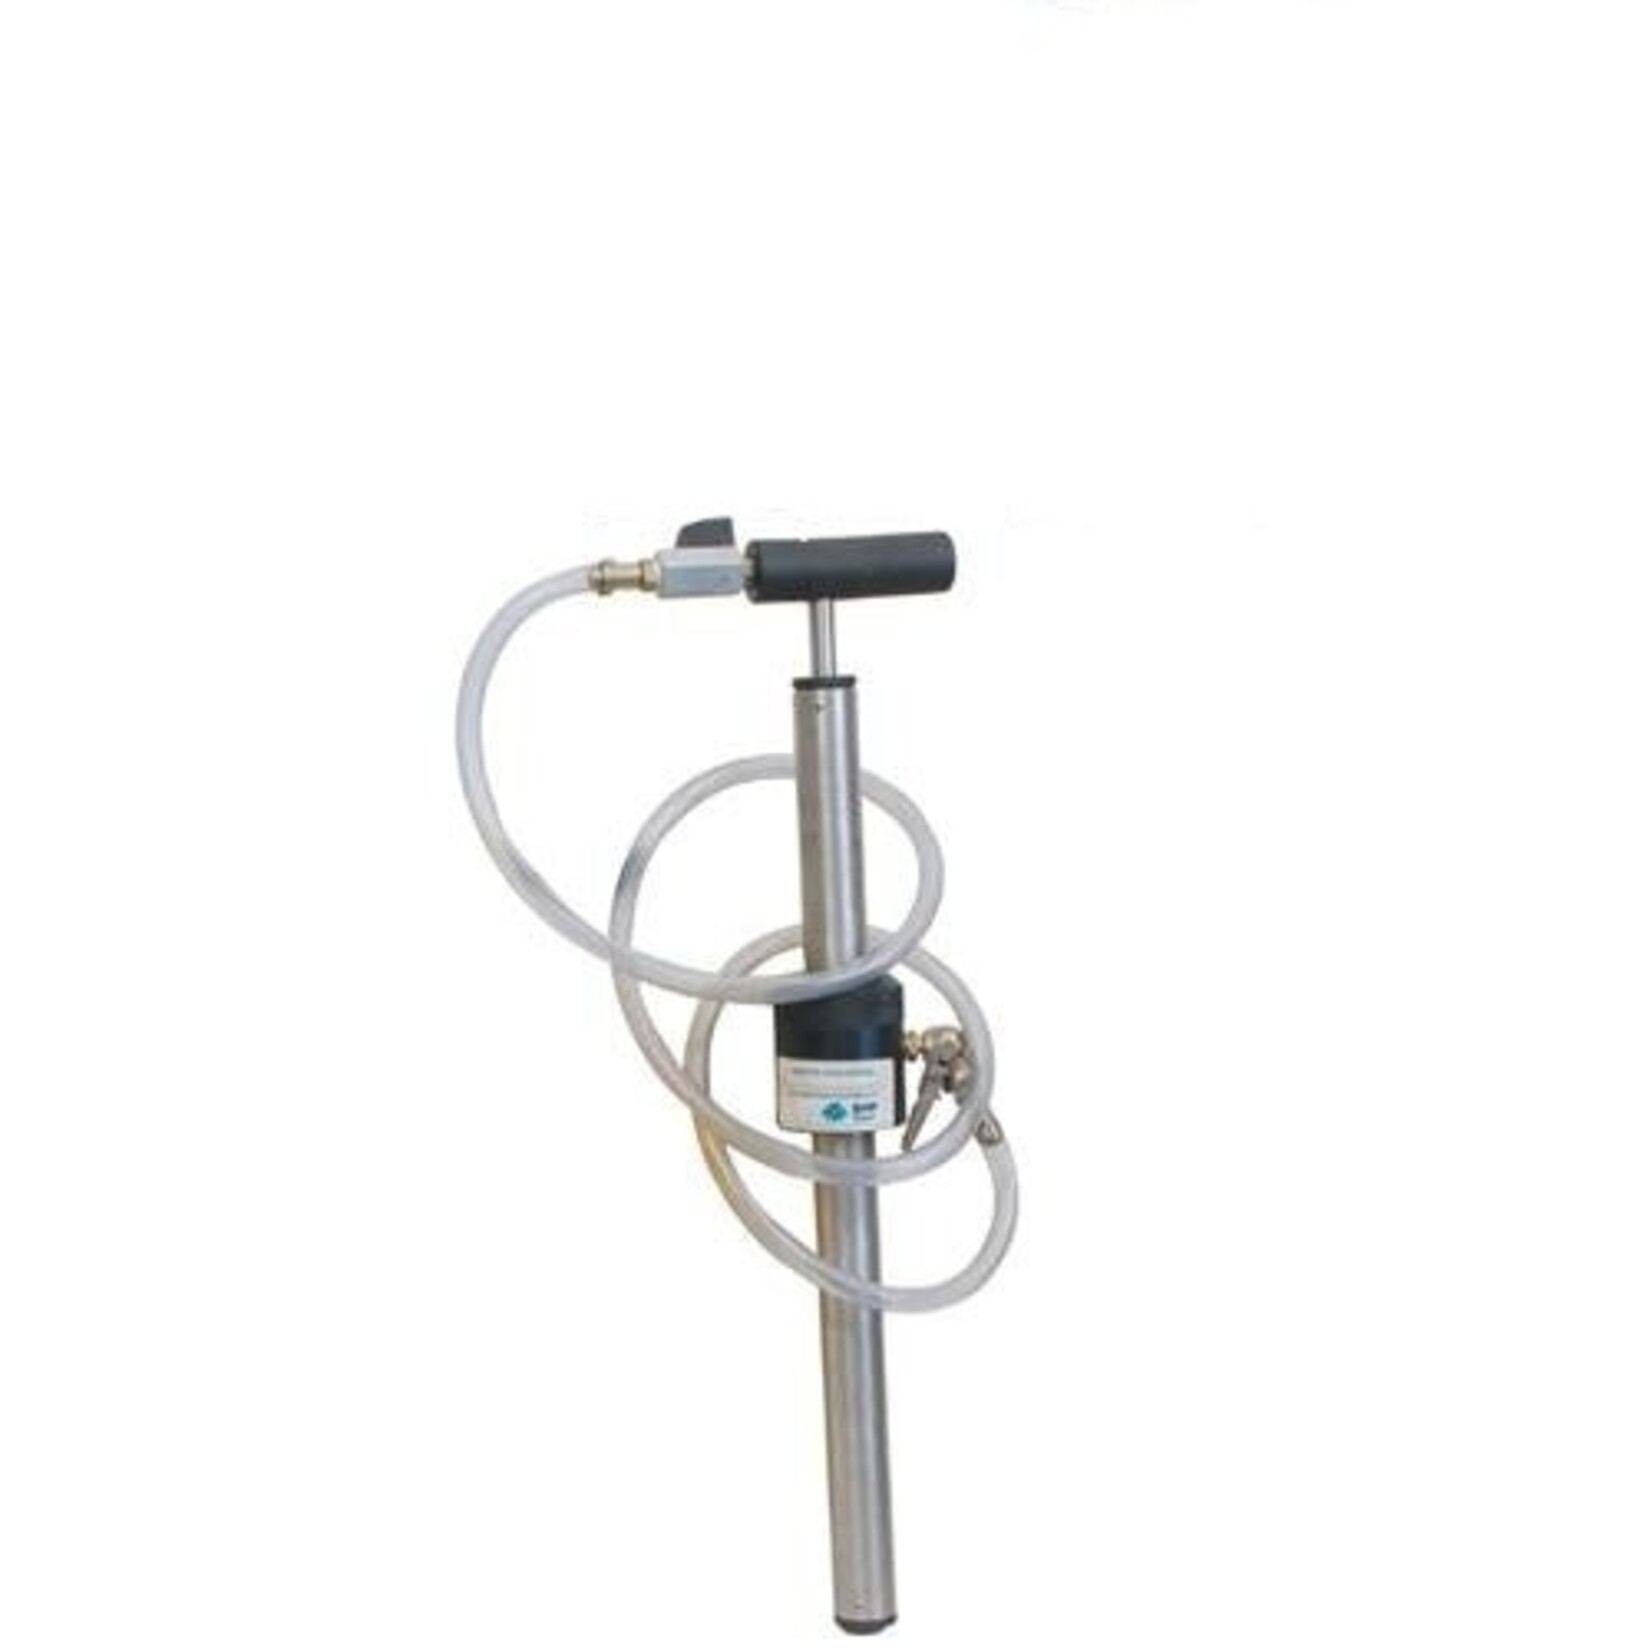 Never Flat Never Flat Bike/Cycling Pump For Use With 20 Litre Never Flat NF20L Pump